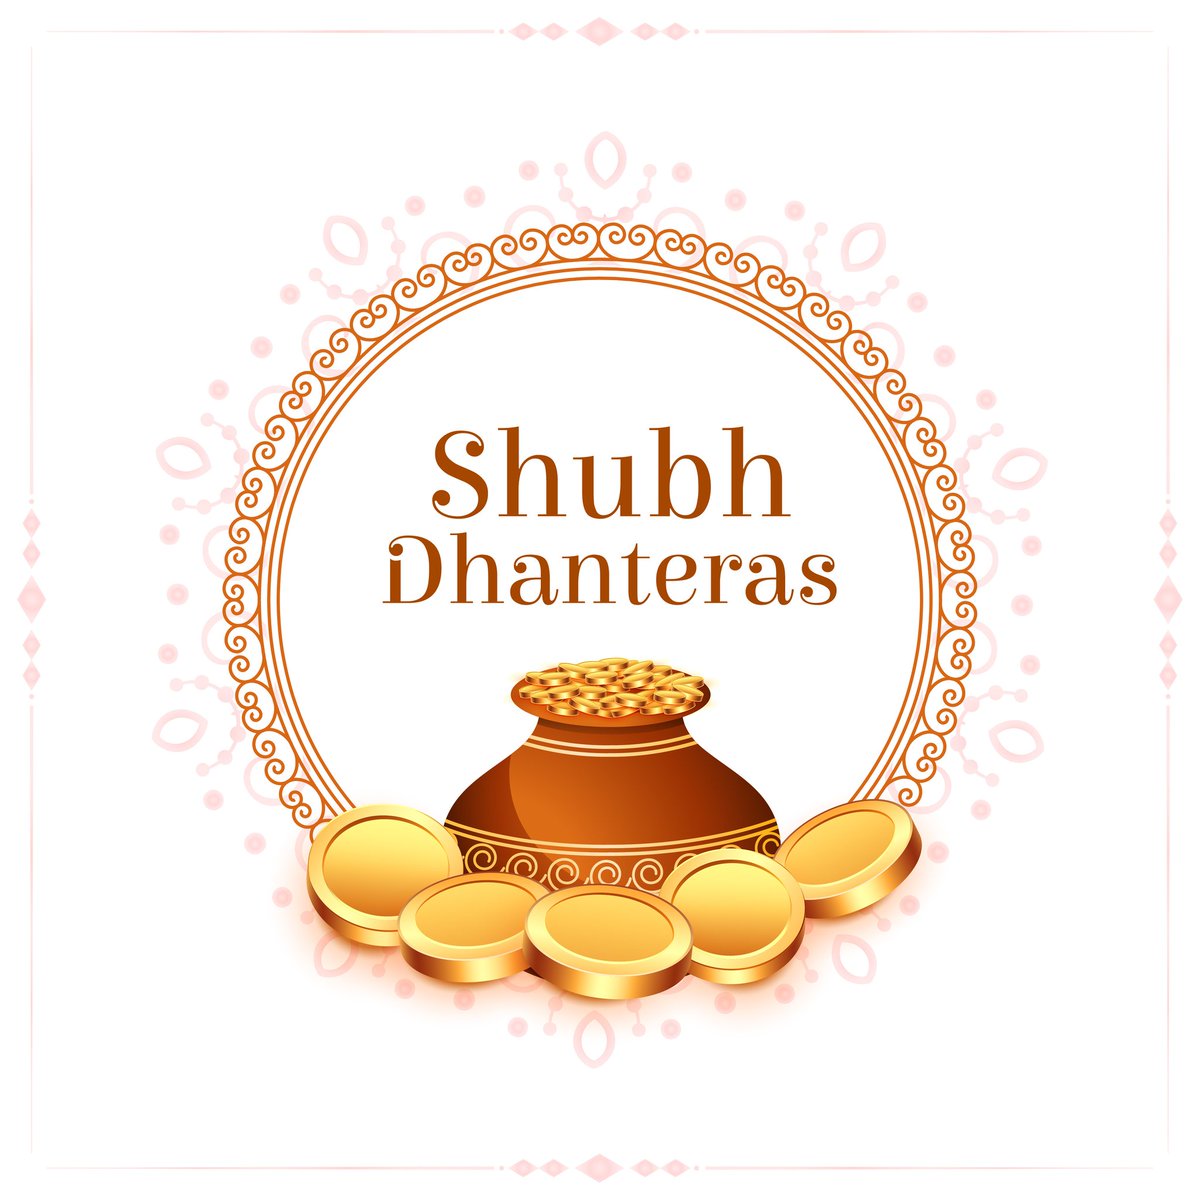 Shubh Dhanteras to All!! ✨

I wish we all are showered with the choicest blessings of Goddess Laxmi, and pray that we are blessed with more wealth, happiness, prosperity & success in the coming year.
.
.
#ShubhDhanteras
#happyDhanteras
#Diwali2023
#Dhanteras
#Diwali